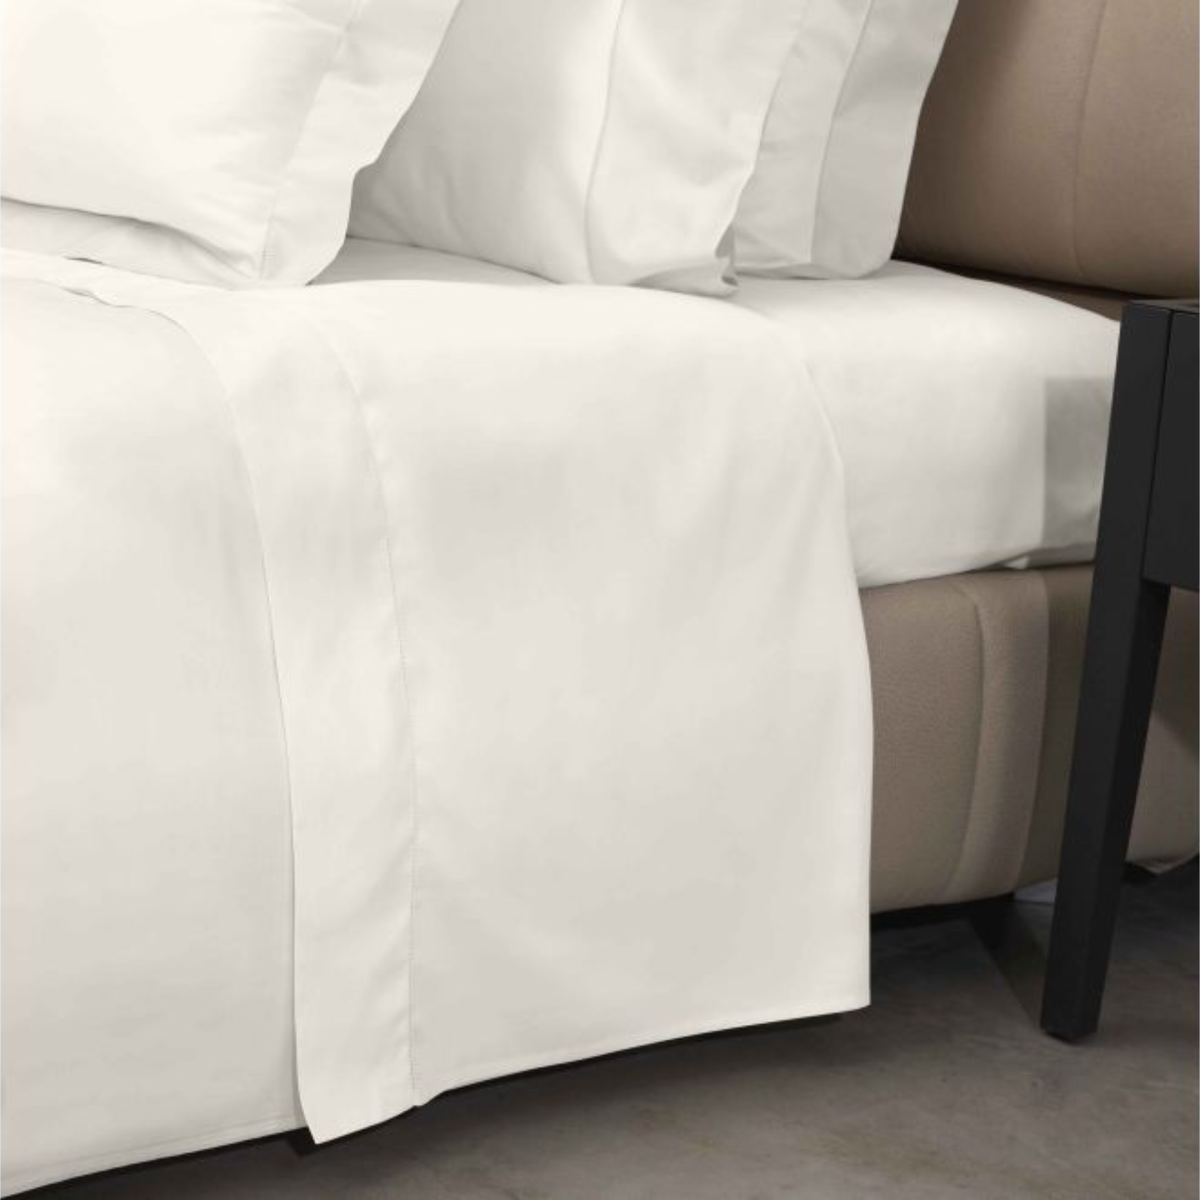 Flat Sheet of Signoria Gemma Bedding in Ivory Color